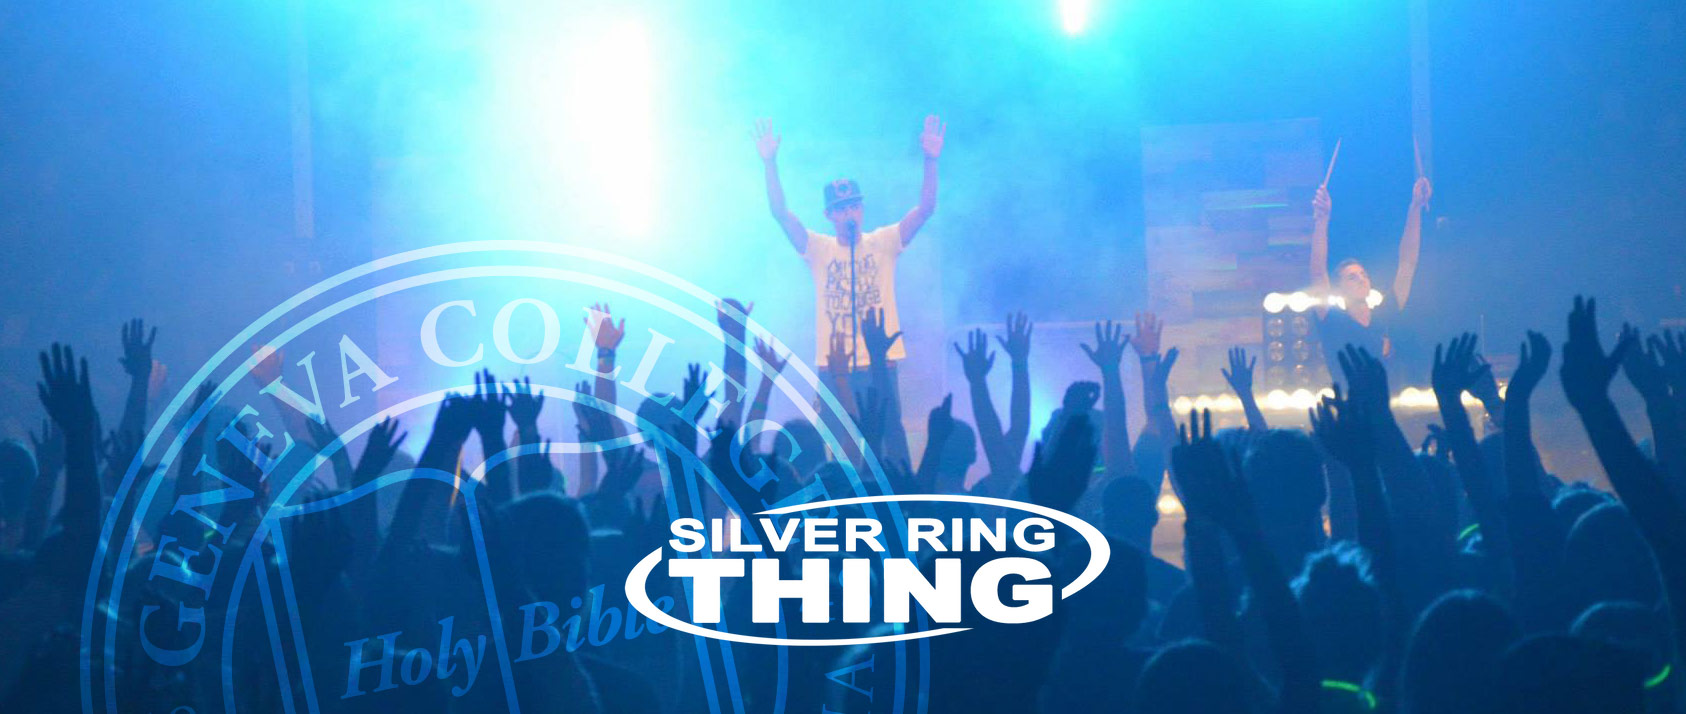 Image of Silver Ring Thing